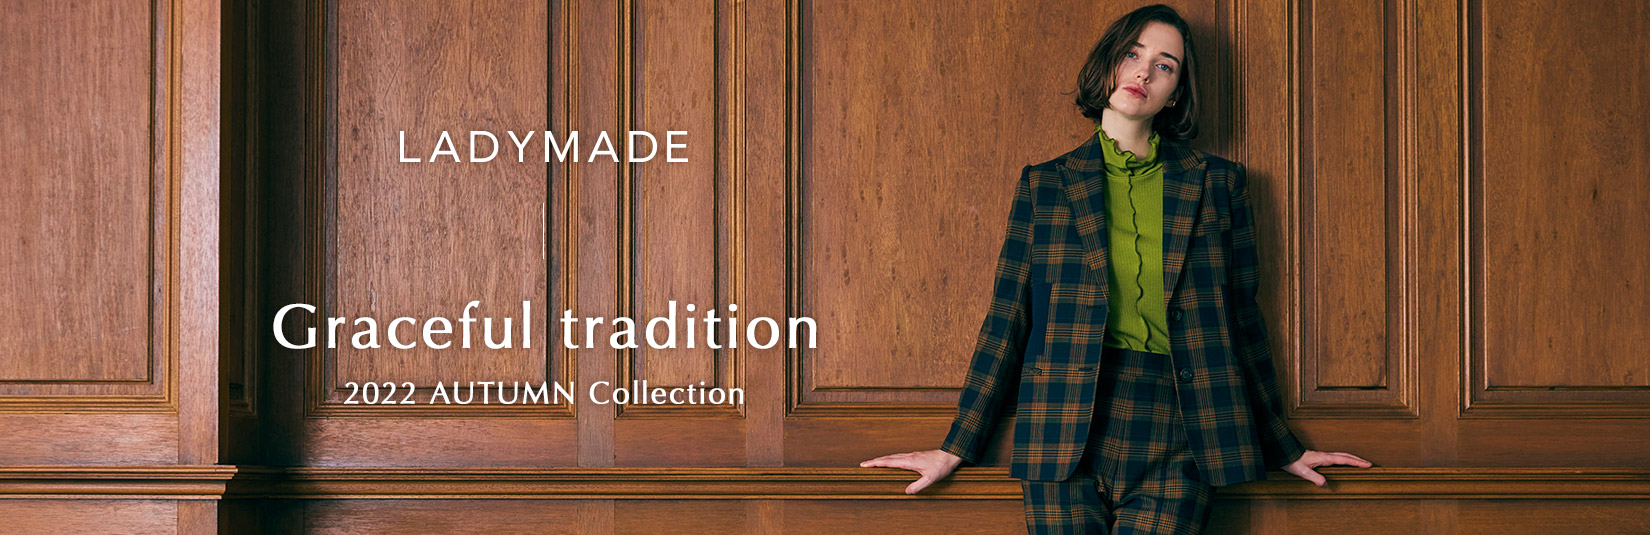 LADYMADE　-Graceful tradition 2022 AUTUMN Collection-